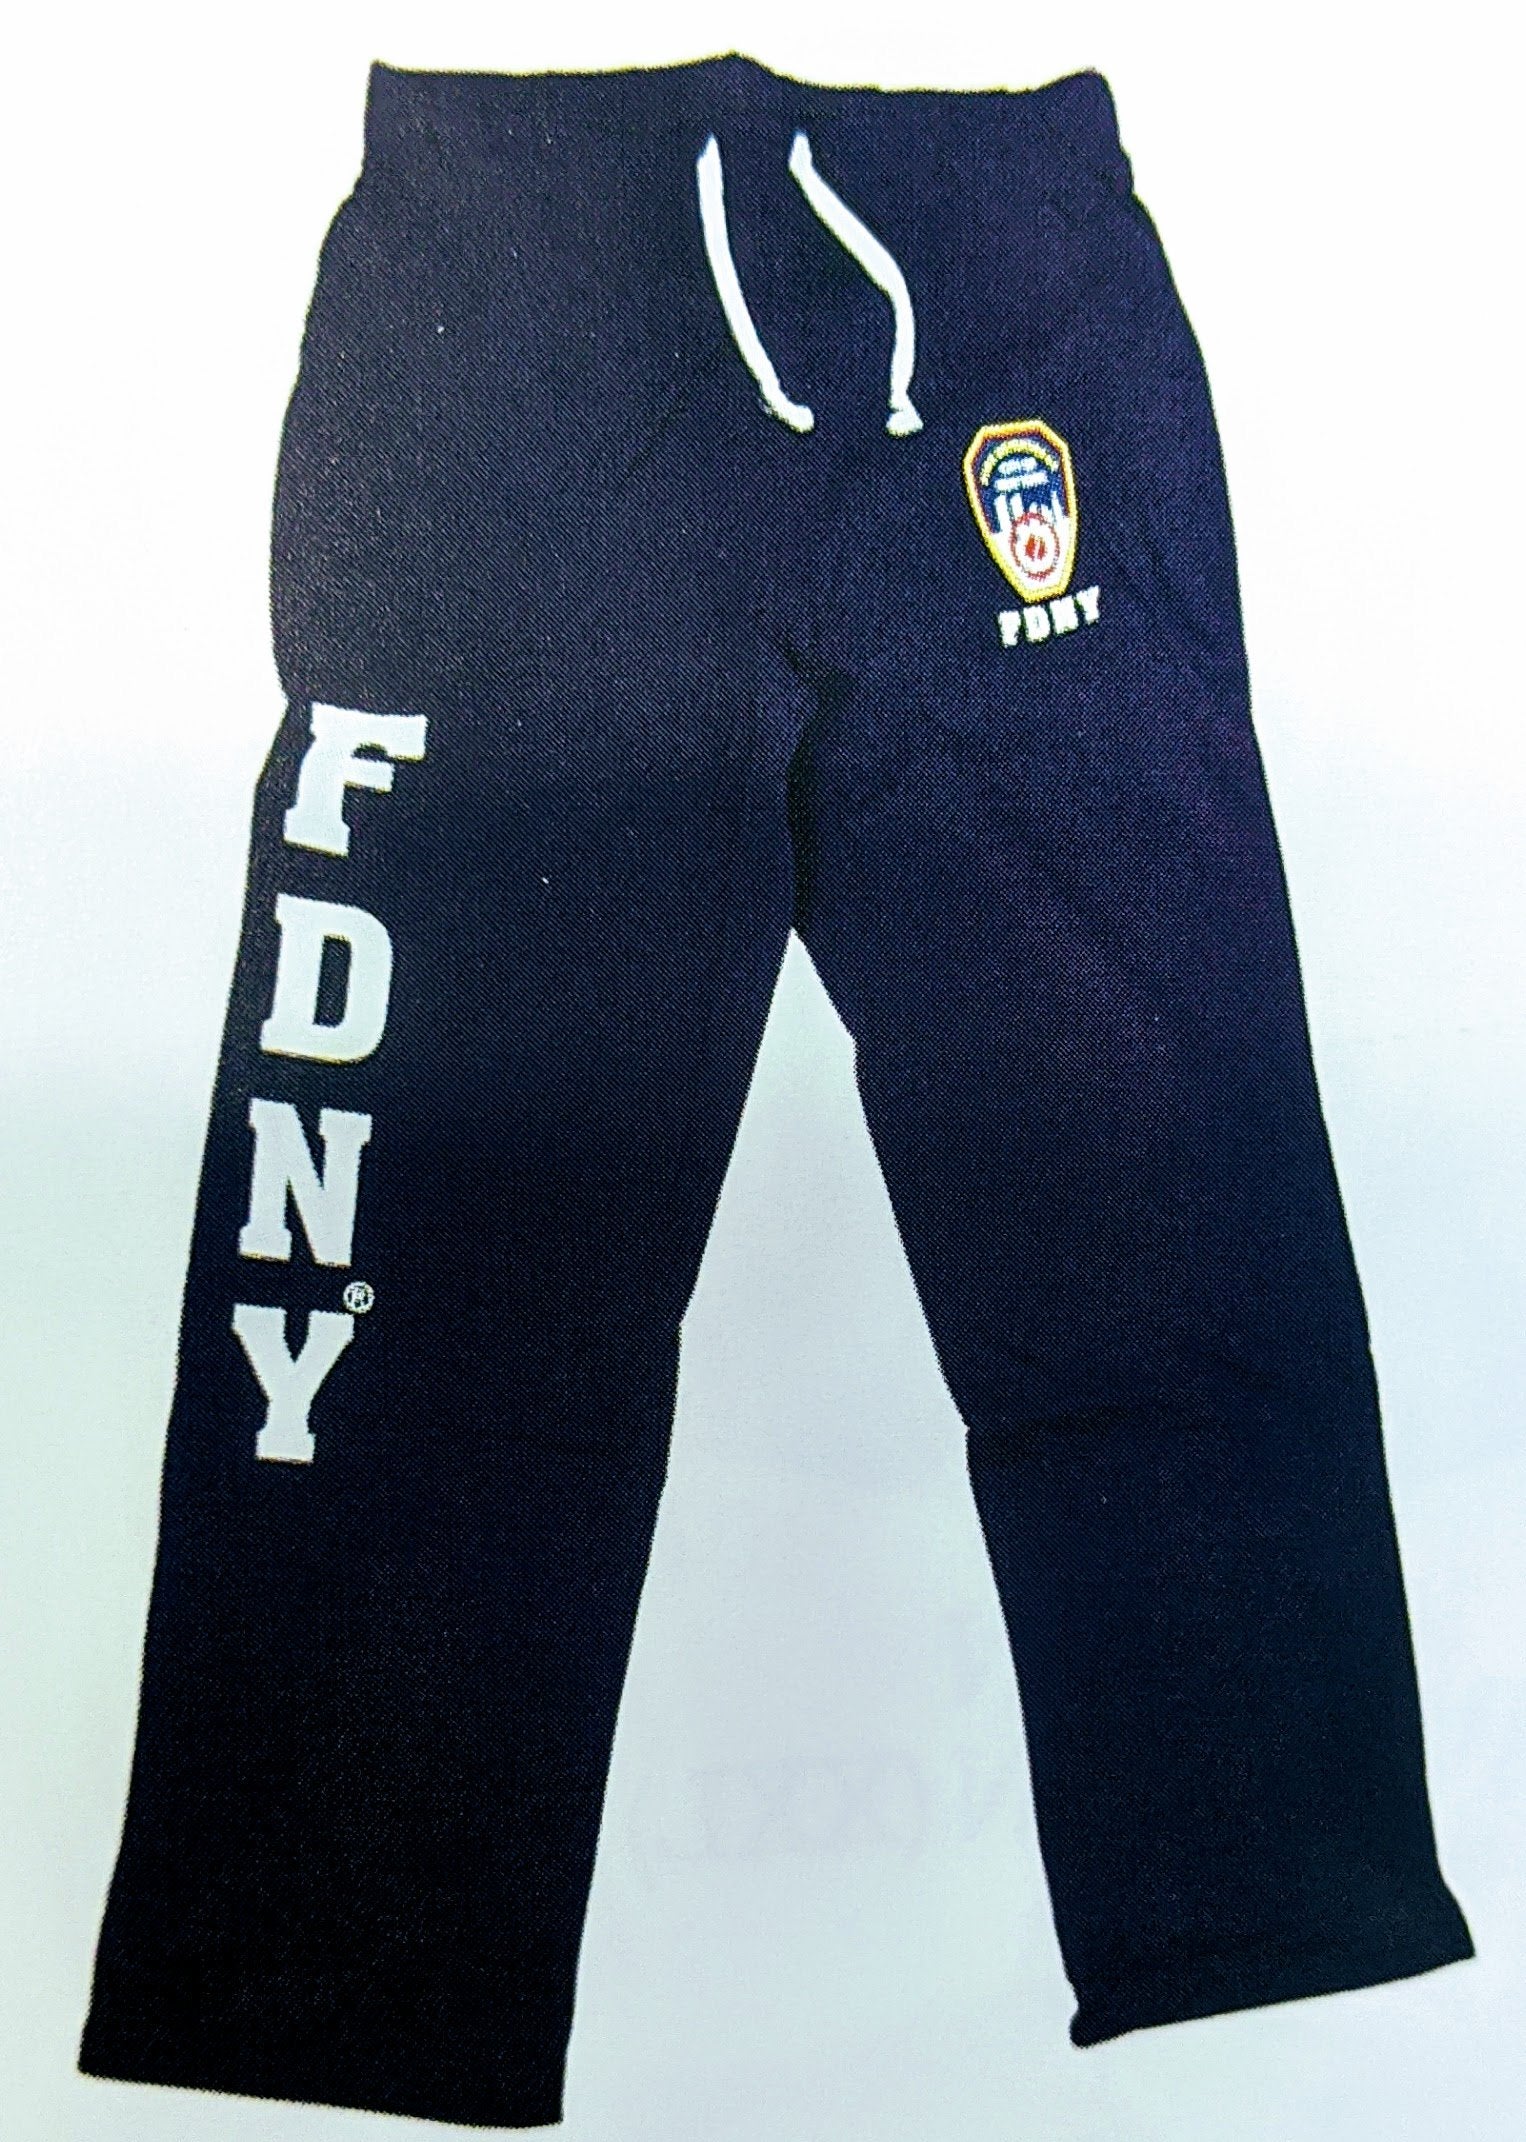 FDNY Men's Sweatpants Officially Licensed